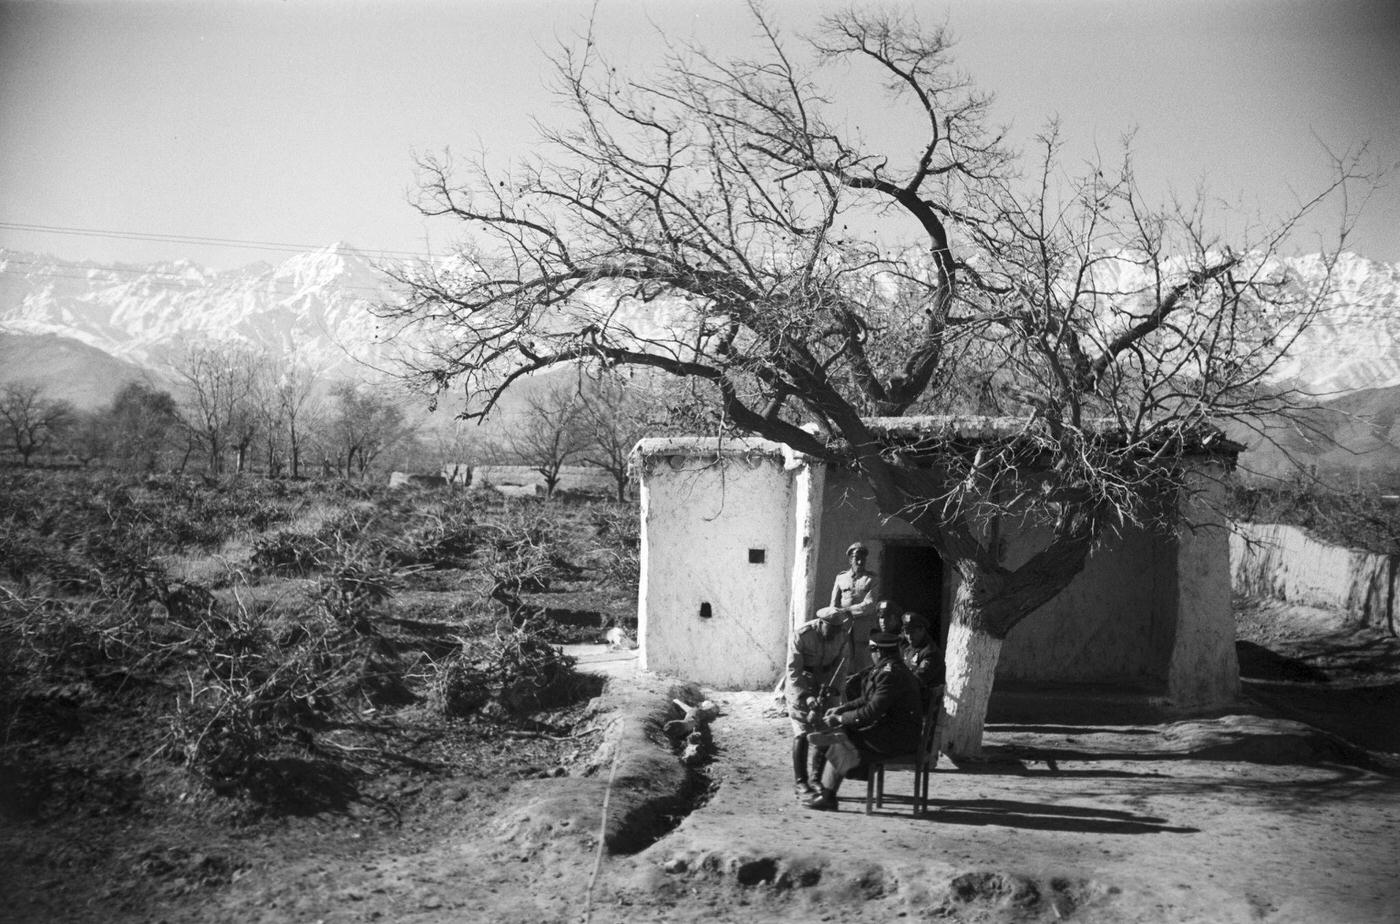 Soldiers, seated near a tree, in front of a dirt building, on the road to Kabul